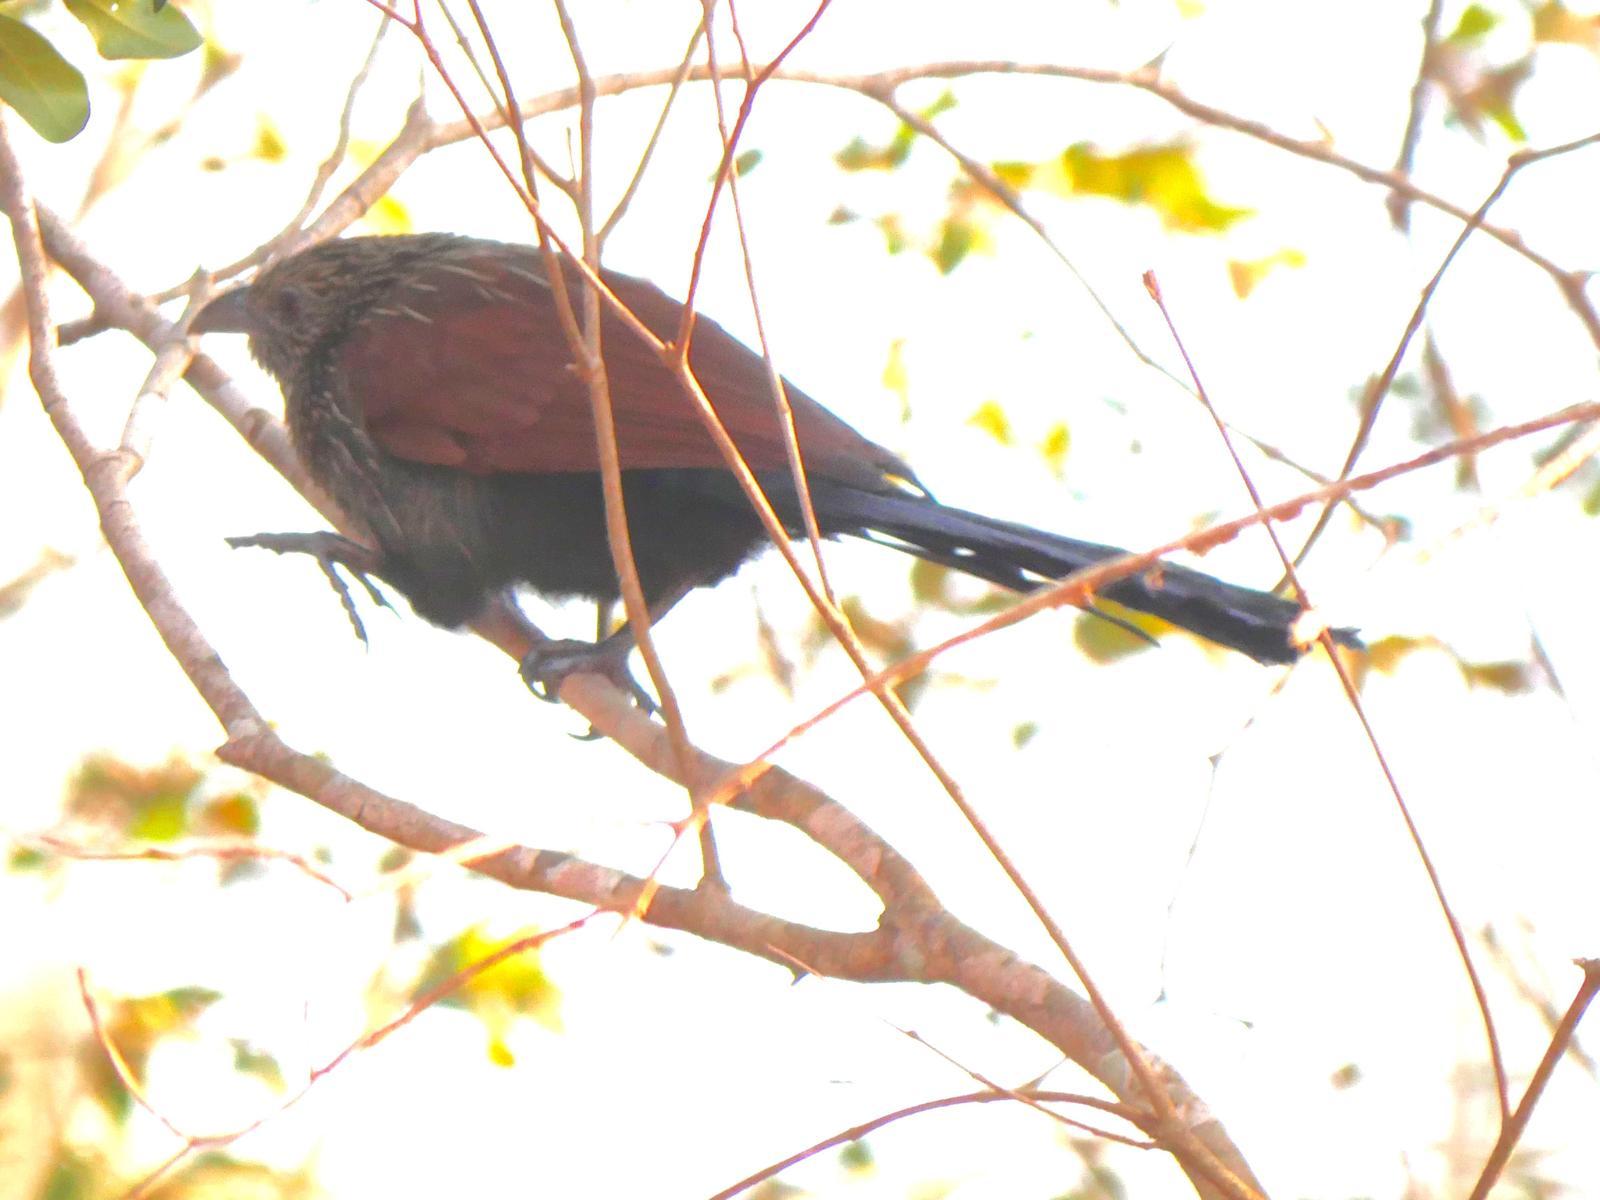 Madagascar Coucal Photo by Peter Lowe